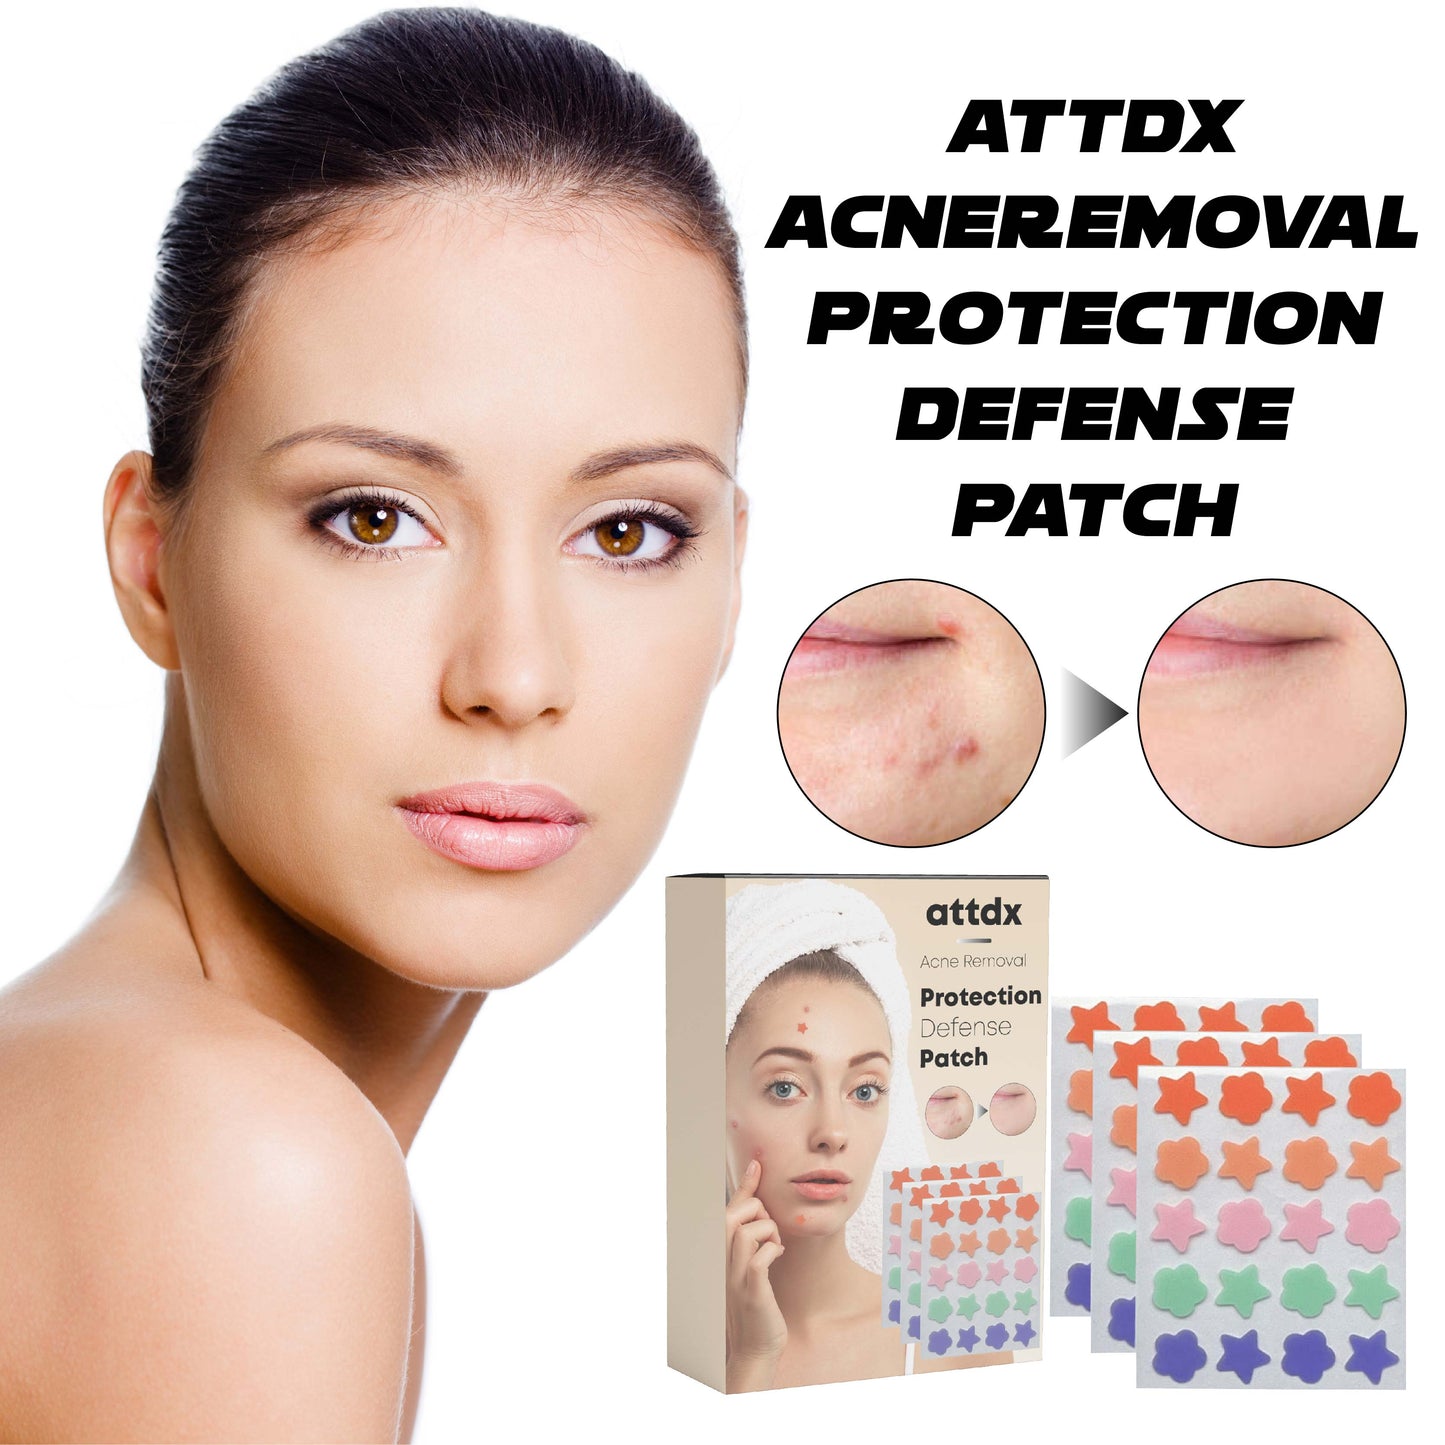 ATTDX AcneRemoval ProtectionDefense Patch